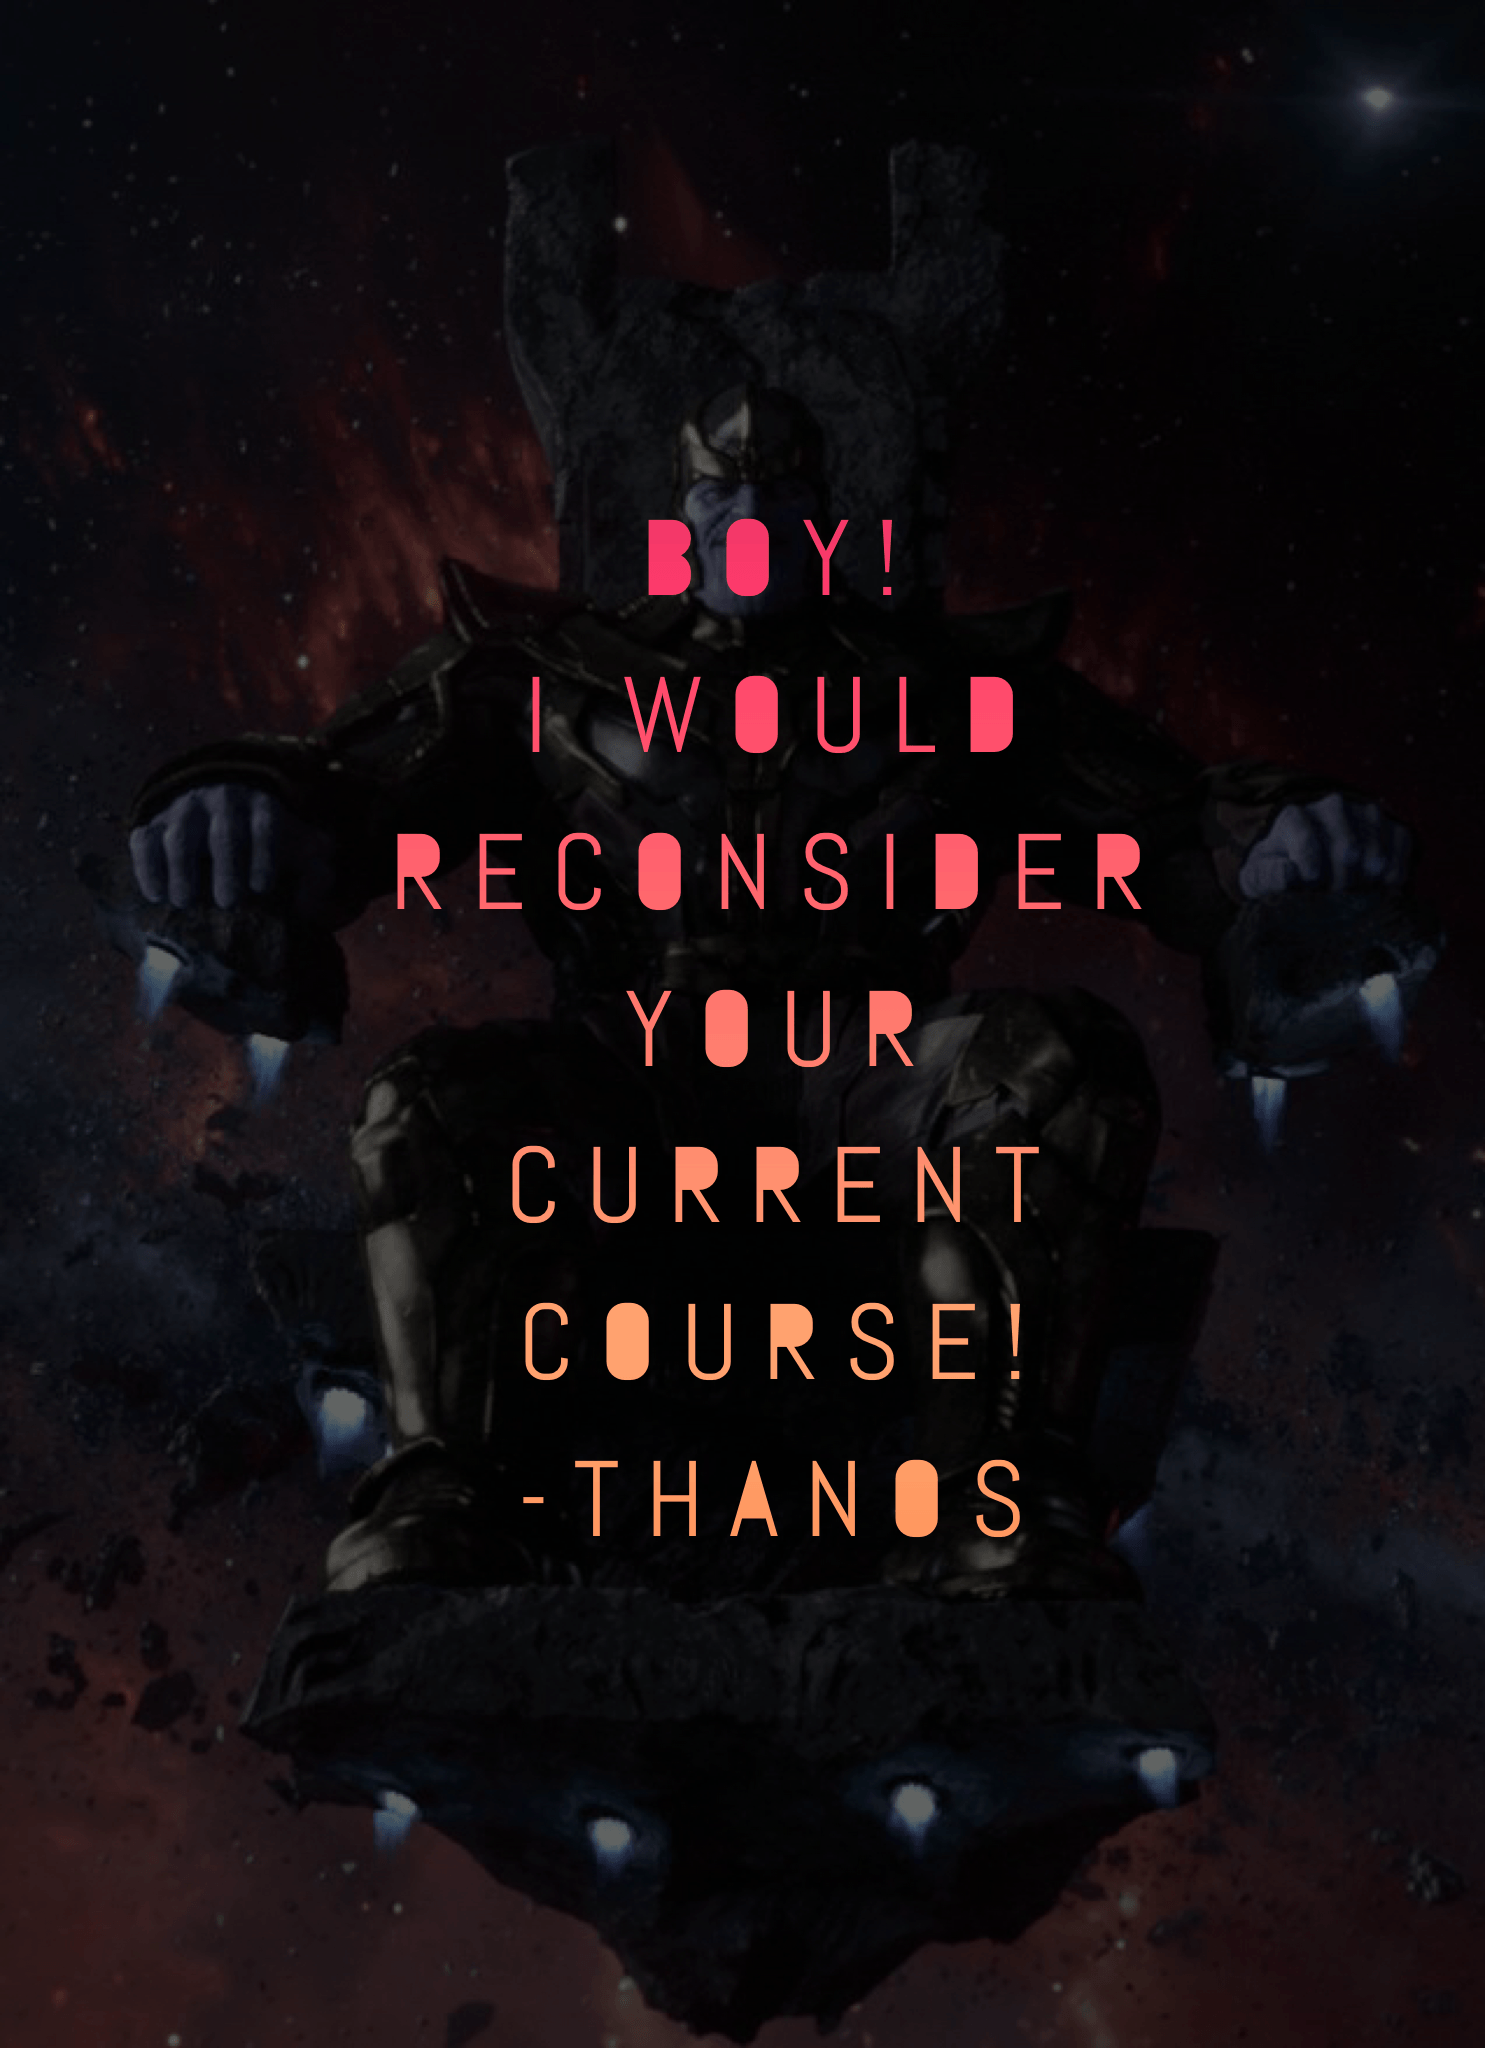 dc character quote • thanos // gotg